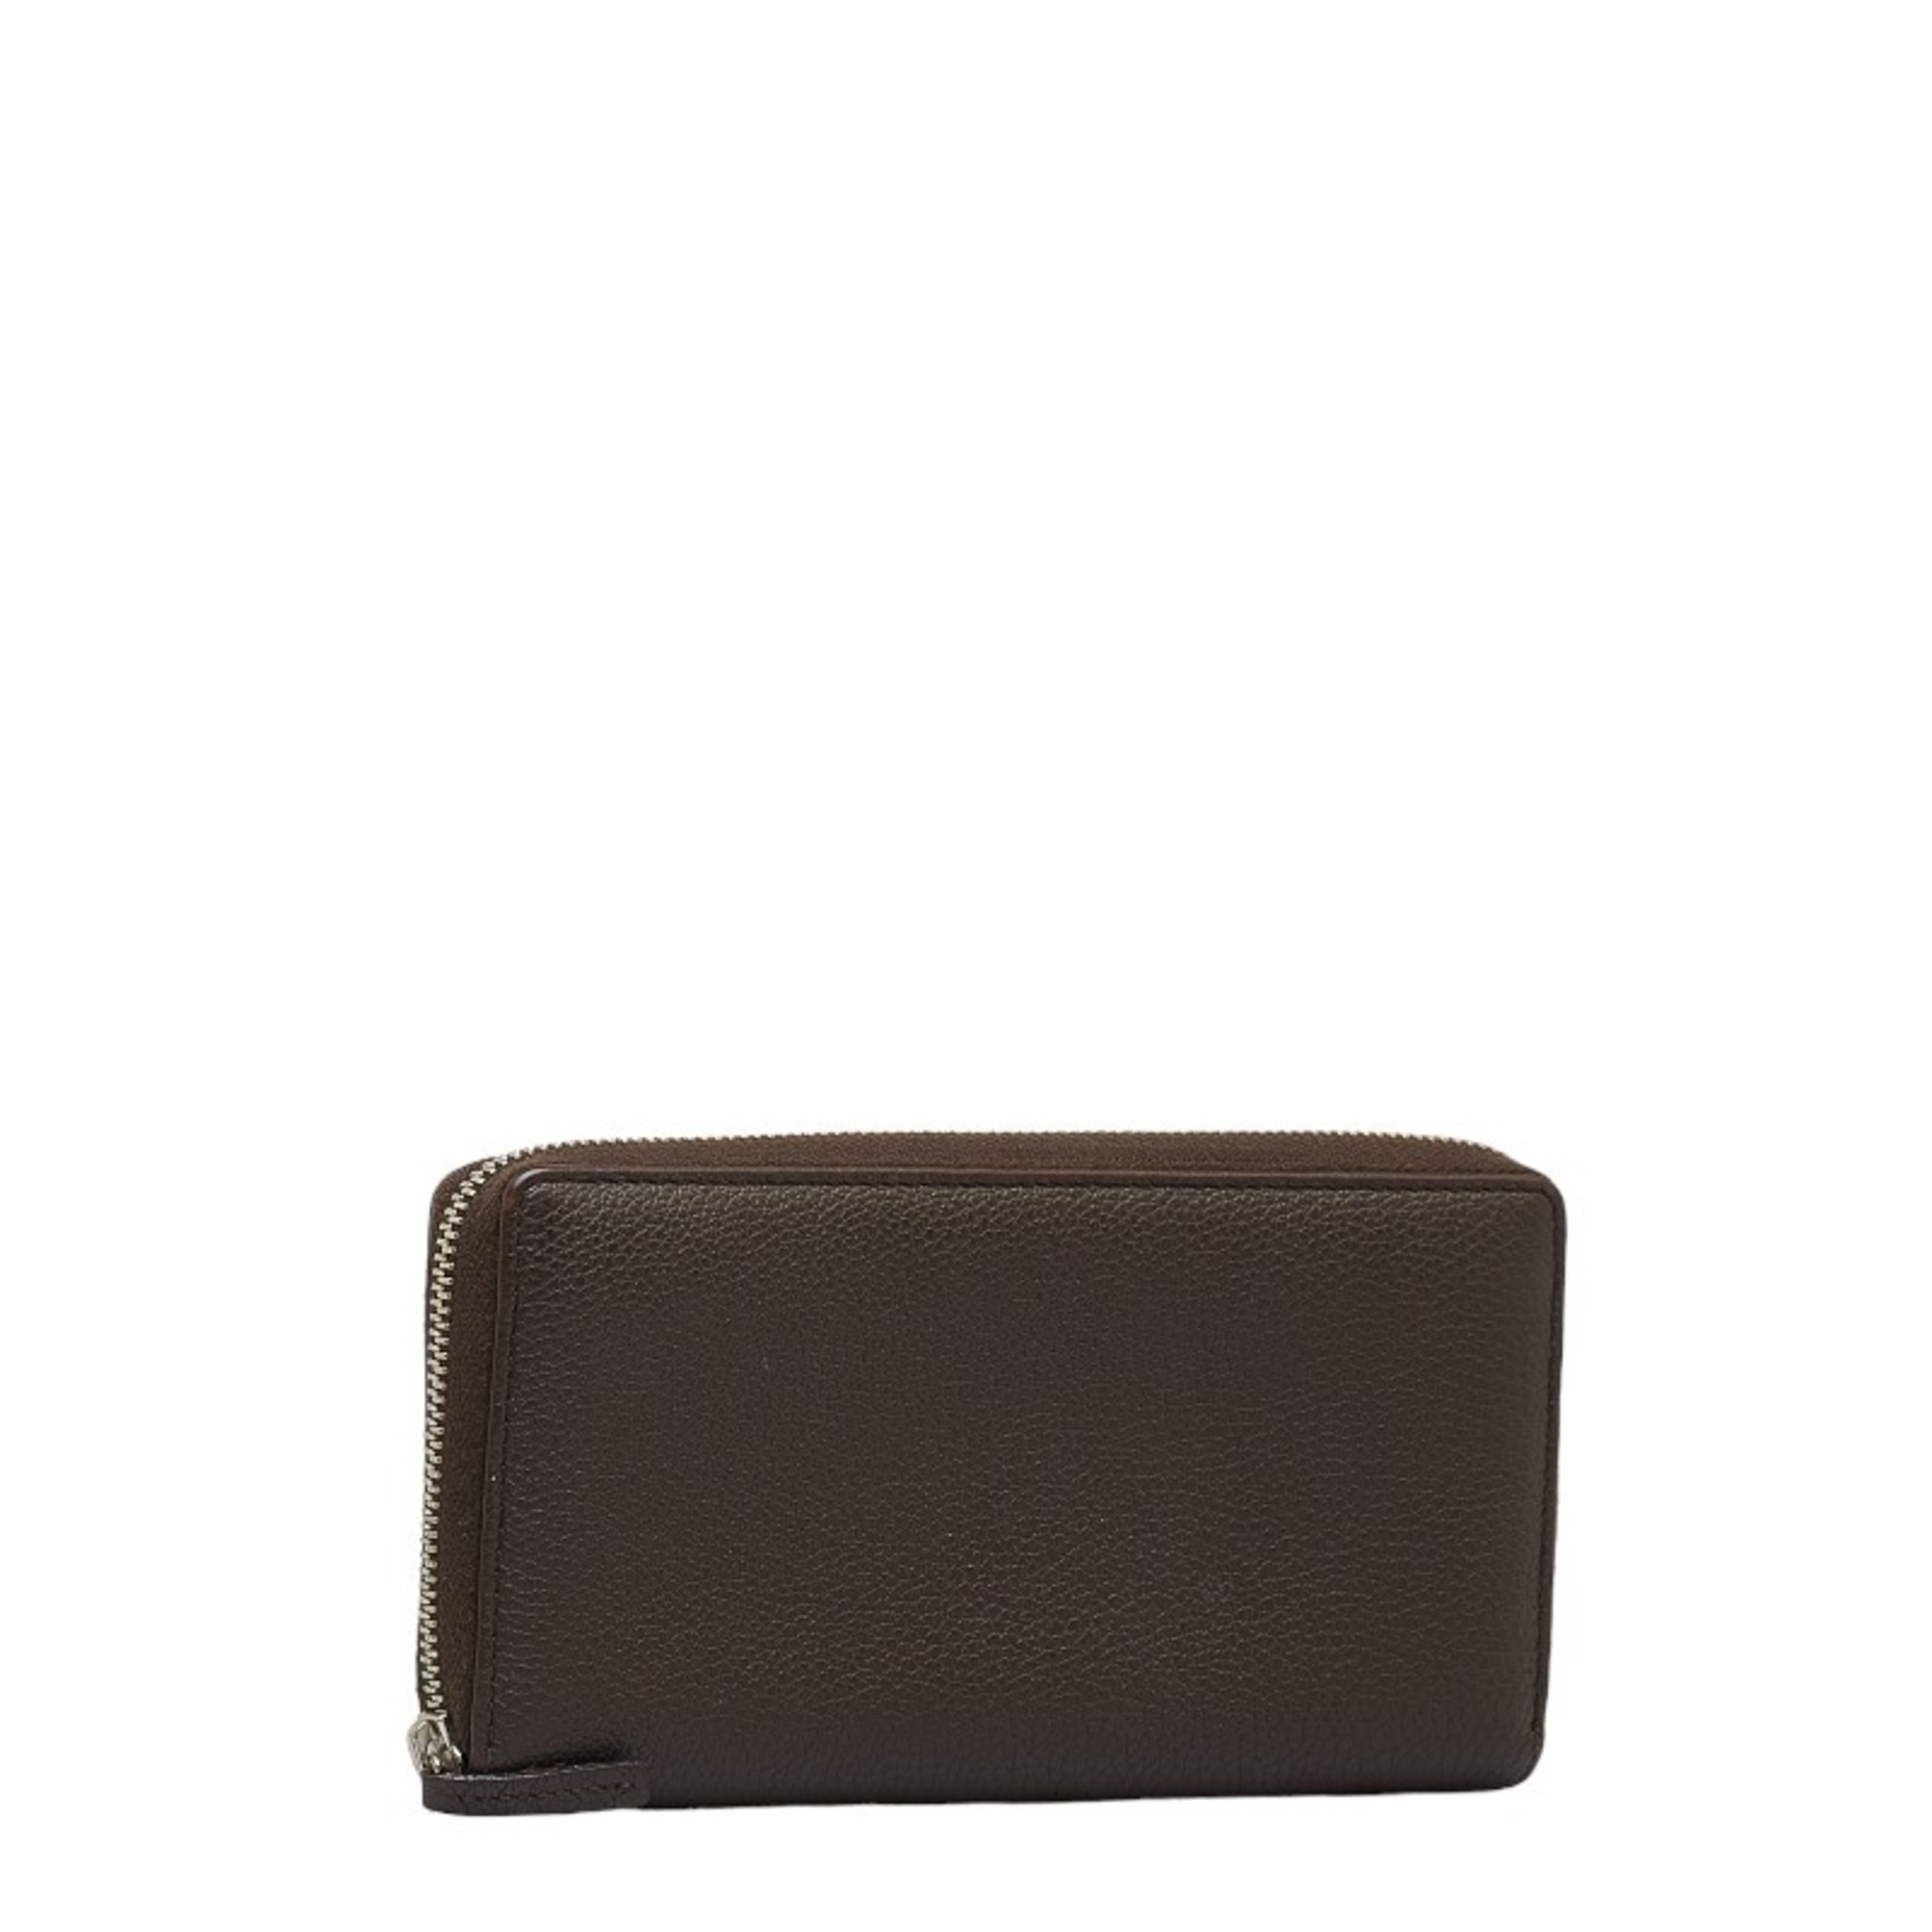 Gucci long wallet brown leather ladies GUCCI